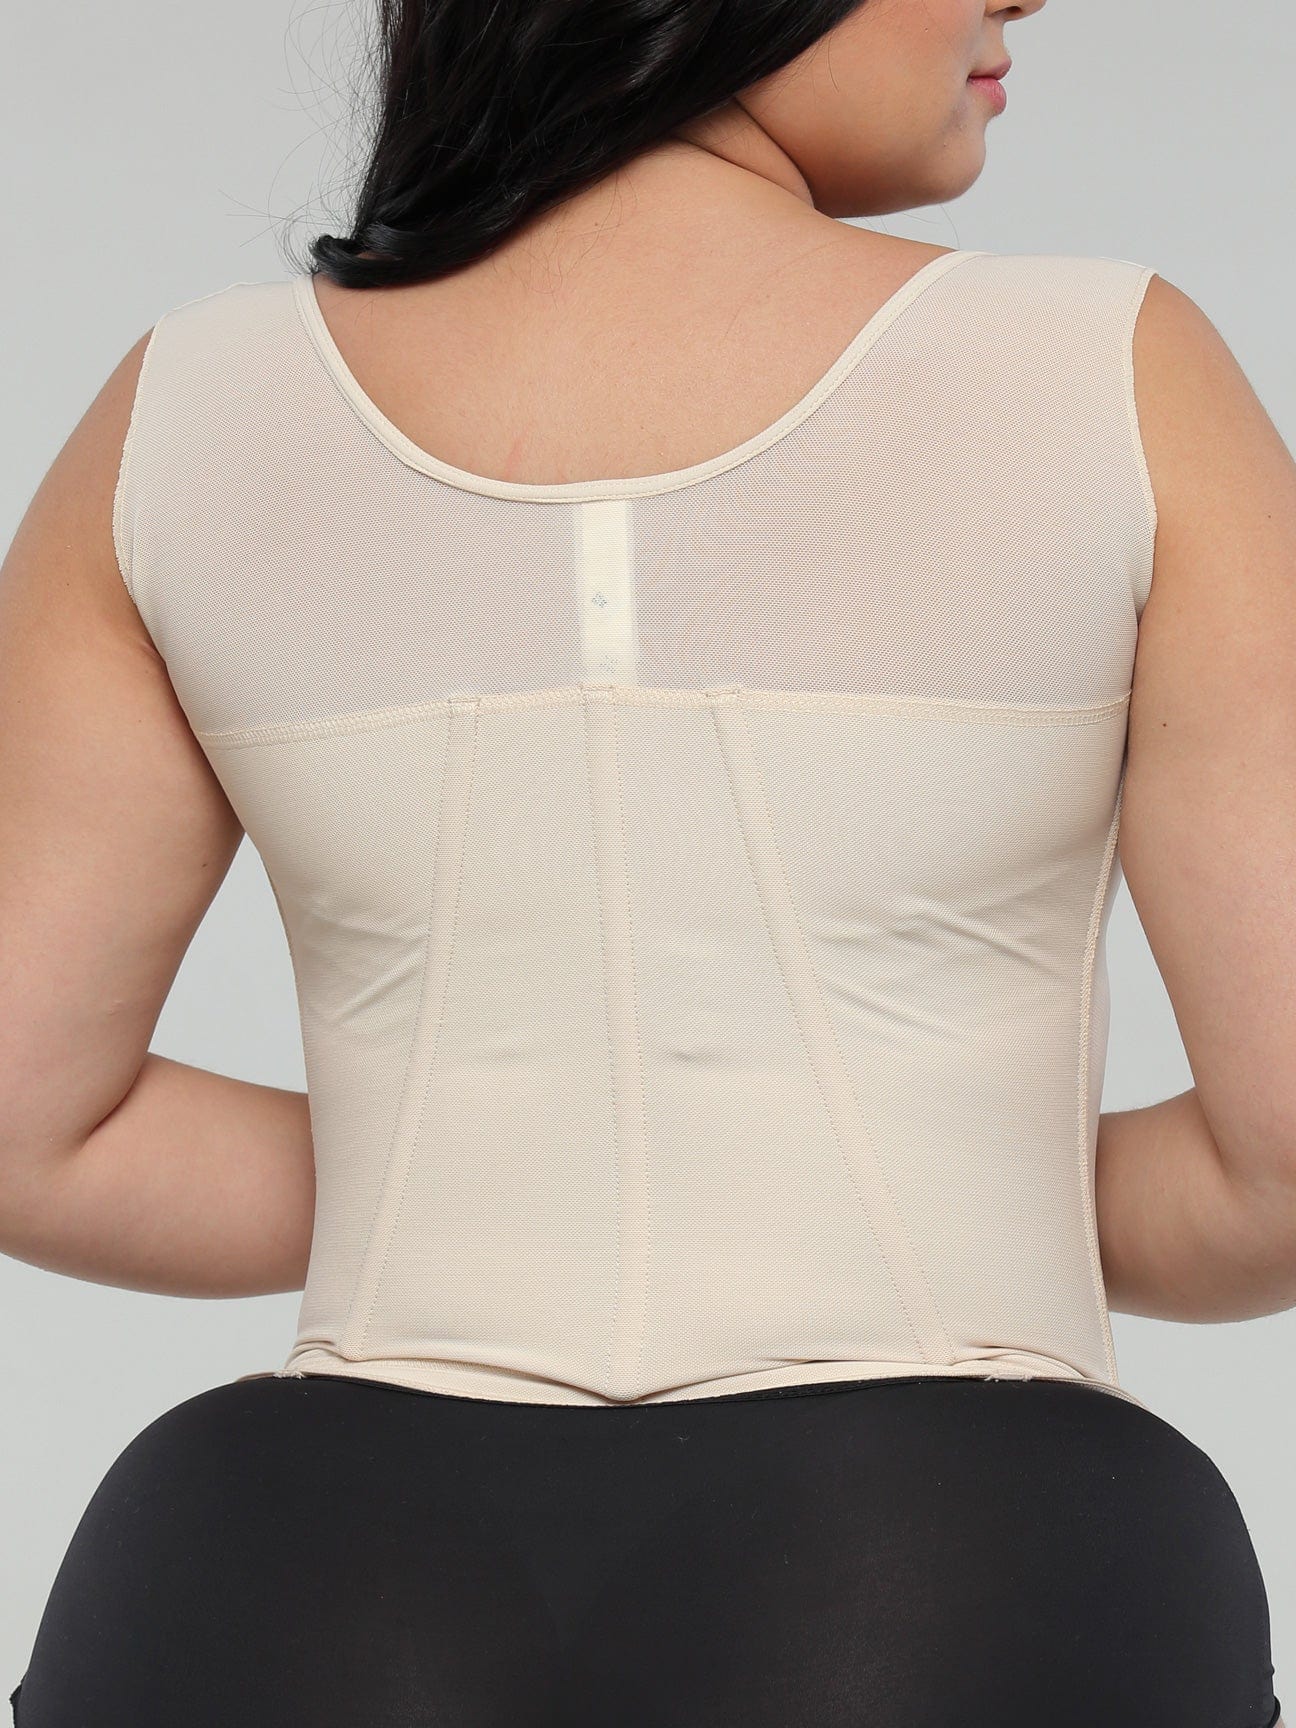 LadySlim by NuvoFit Fajas Colombiana Full Latex Chaleco Vest Waist Cincher  Trainer Trimmer Girdle Workout Corset Body Shaper, Beige, S : :  Fashion